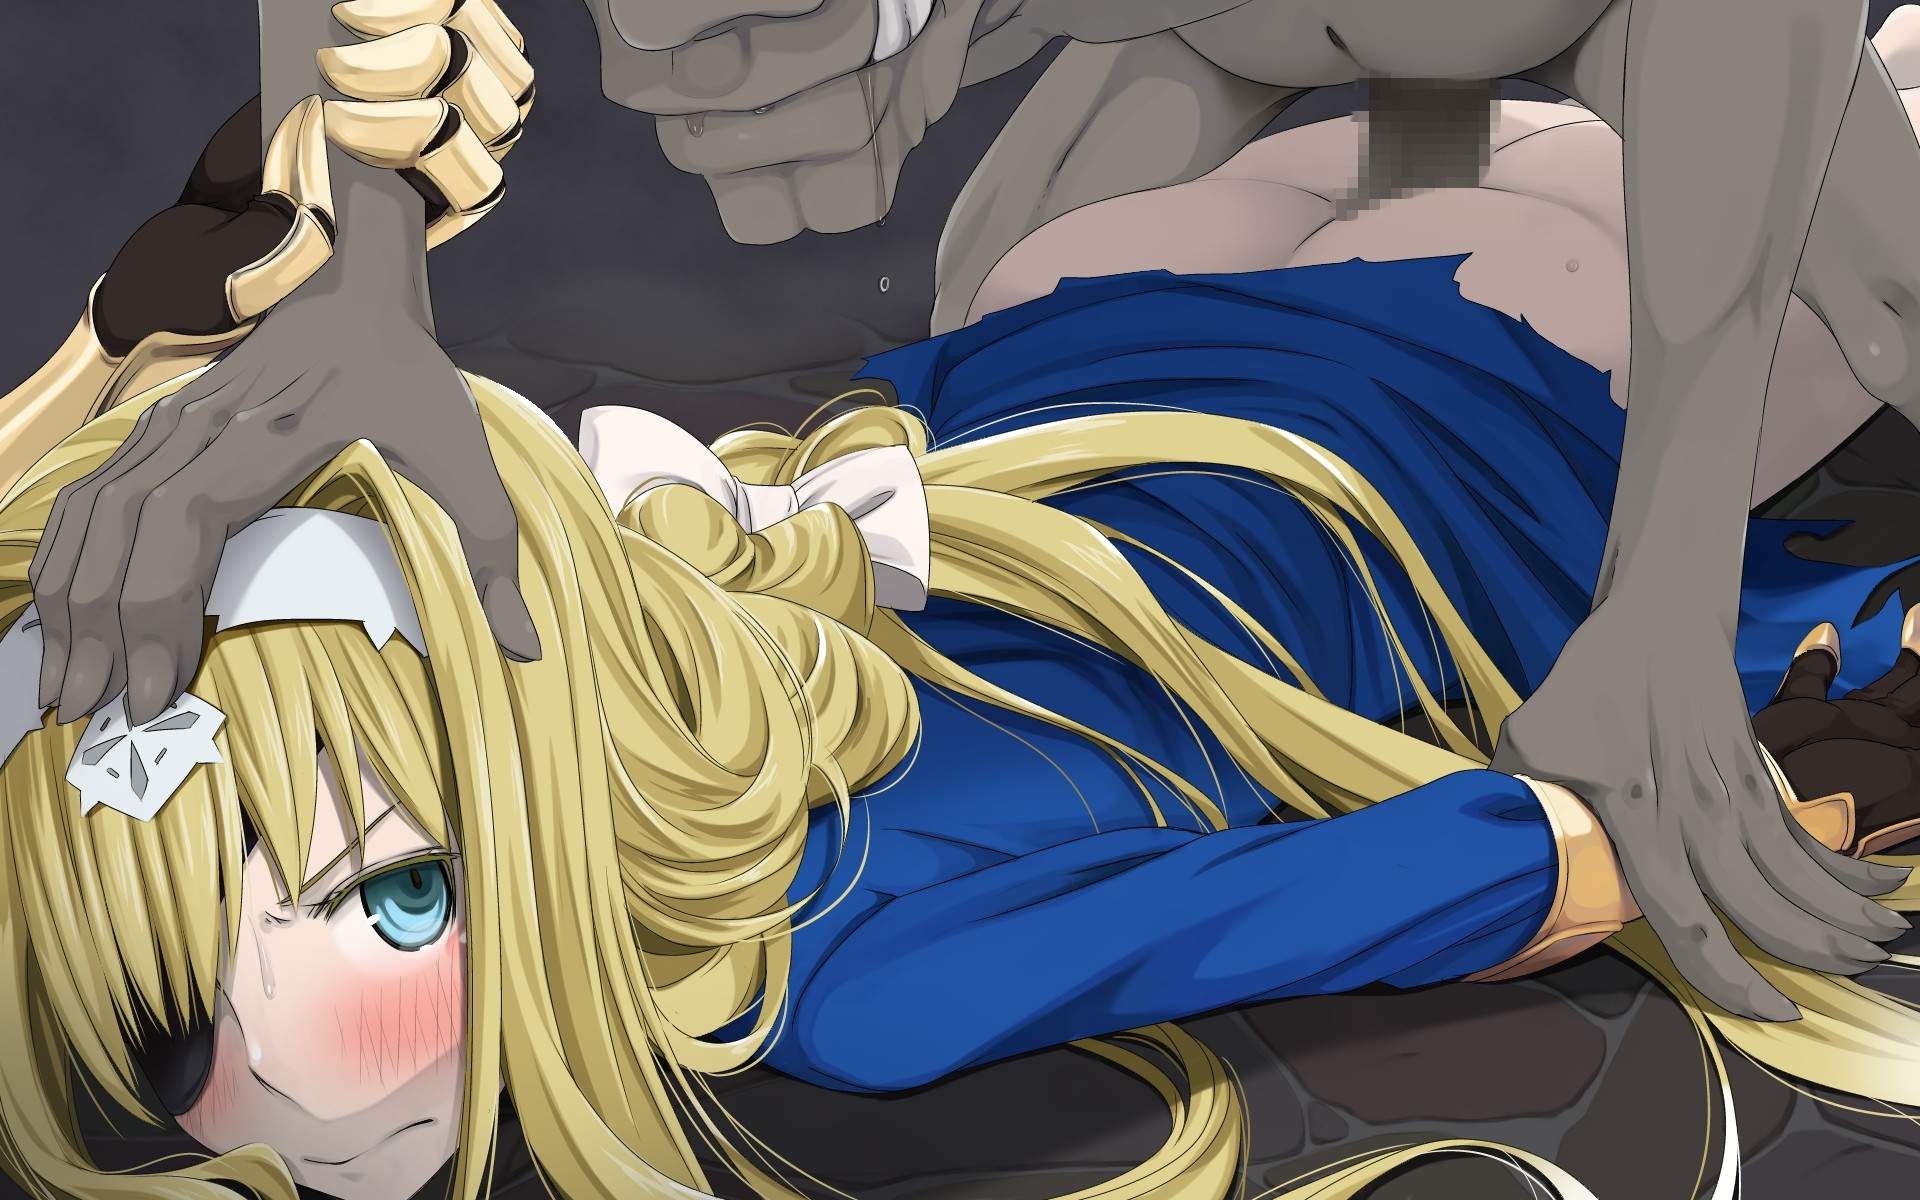 【Secondary Erotic】Here is the erotic image of Alice appearing in Sword Art Online 24